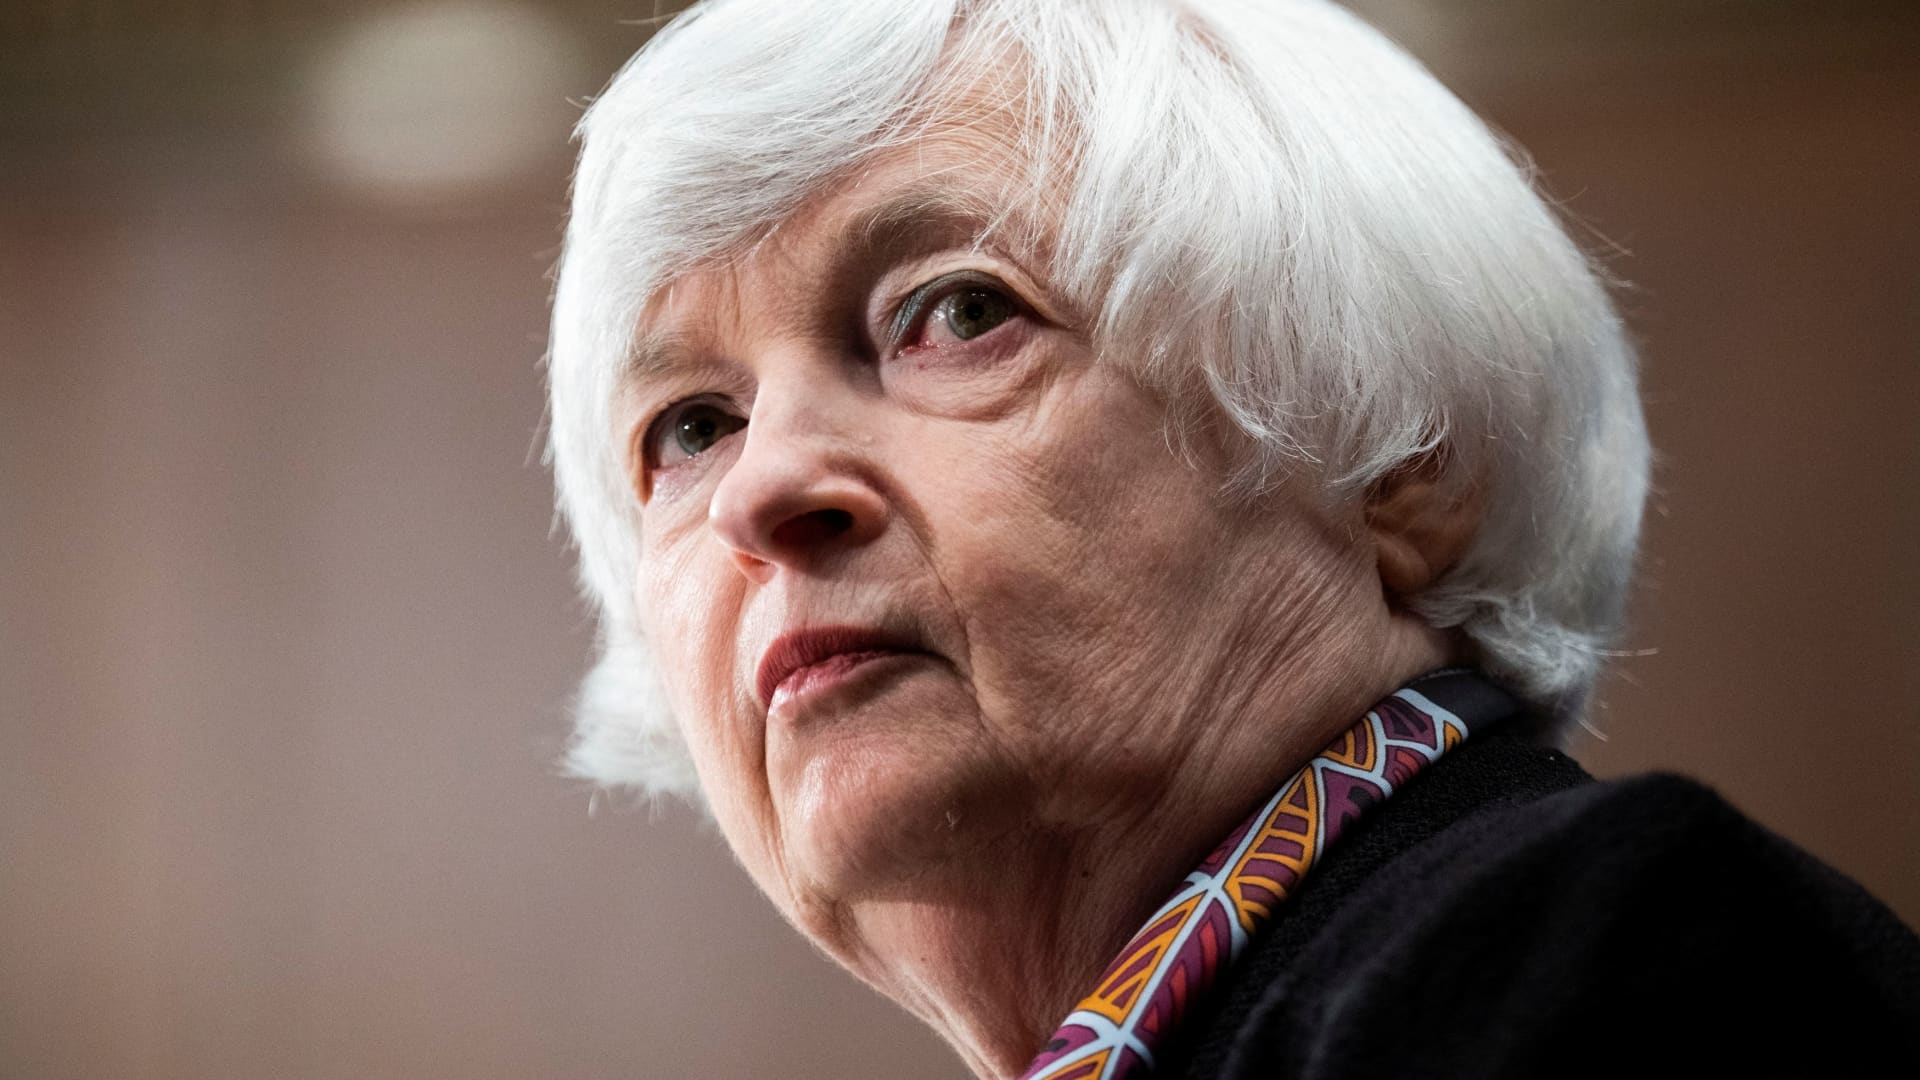 Treasury Secretary Janet Yellen testifies during the Senate Banking, Housing, and Urban Affairs Committee hearing titled “The Financial Stability Oversight Council Annual Report to Congress,” in Dirksen Senate Office Building in Washington, D.C., May 10, 2022.